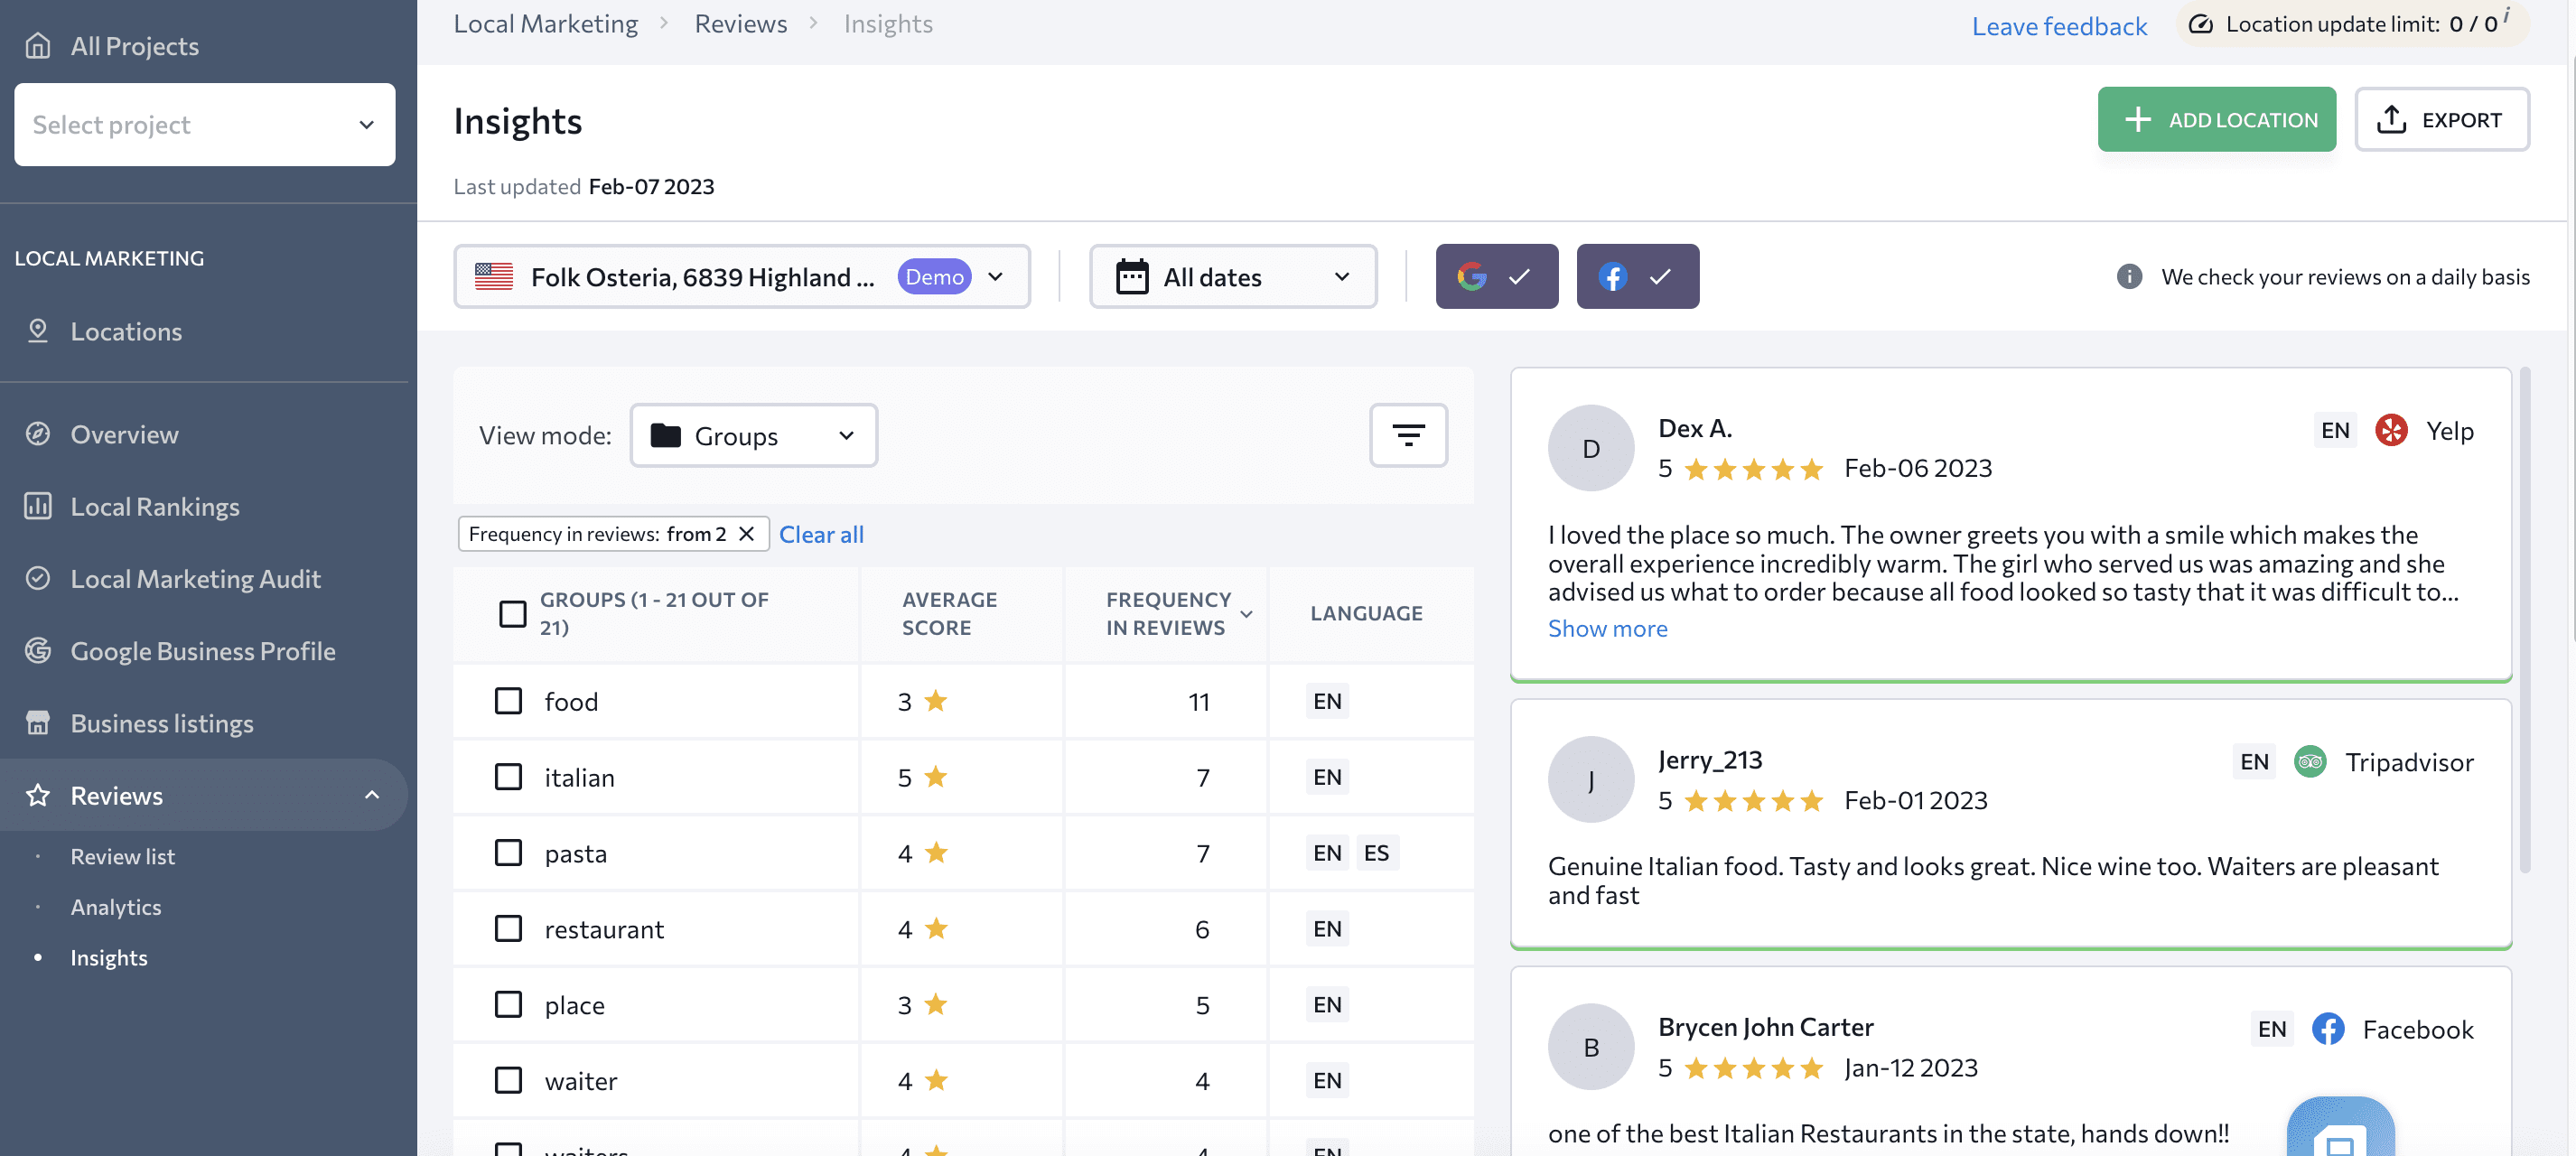 Review Insights tab